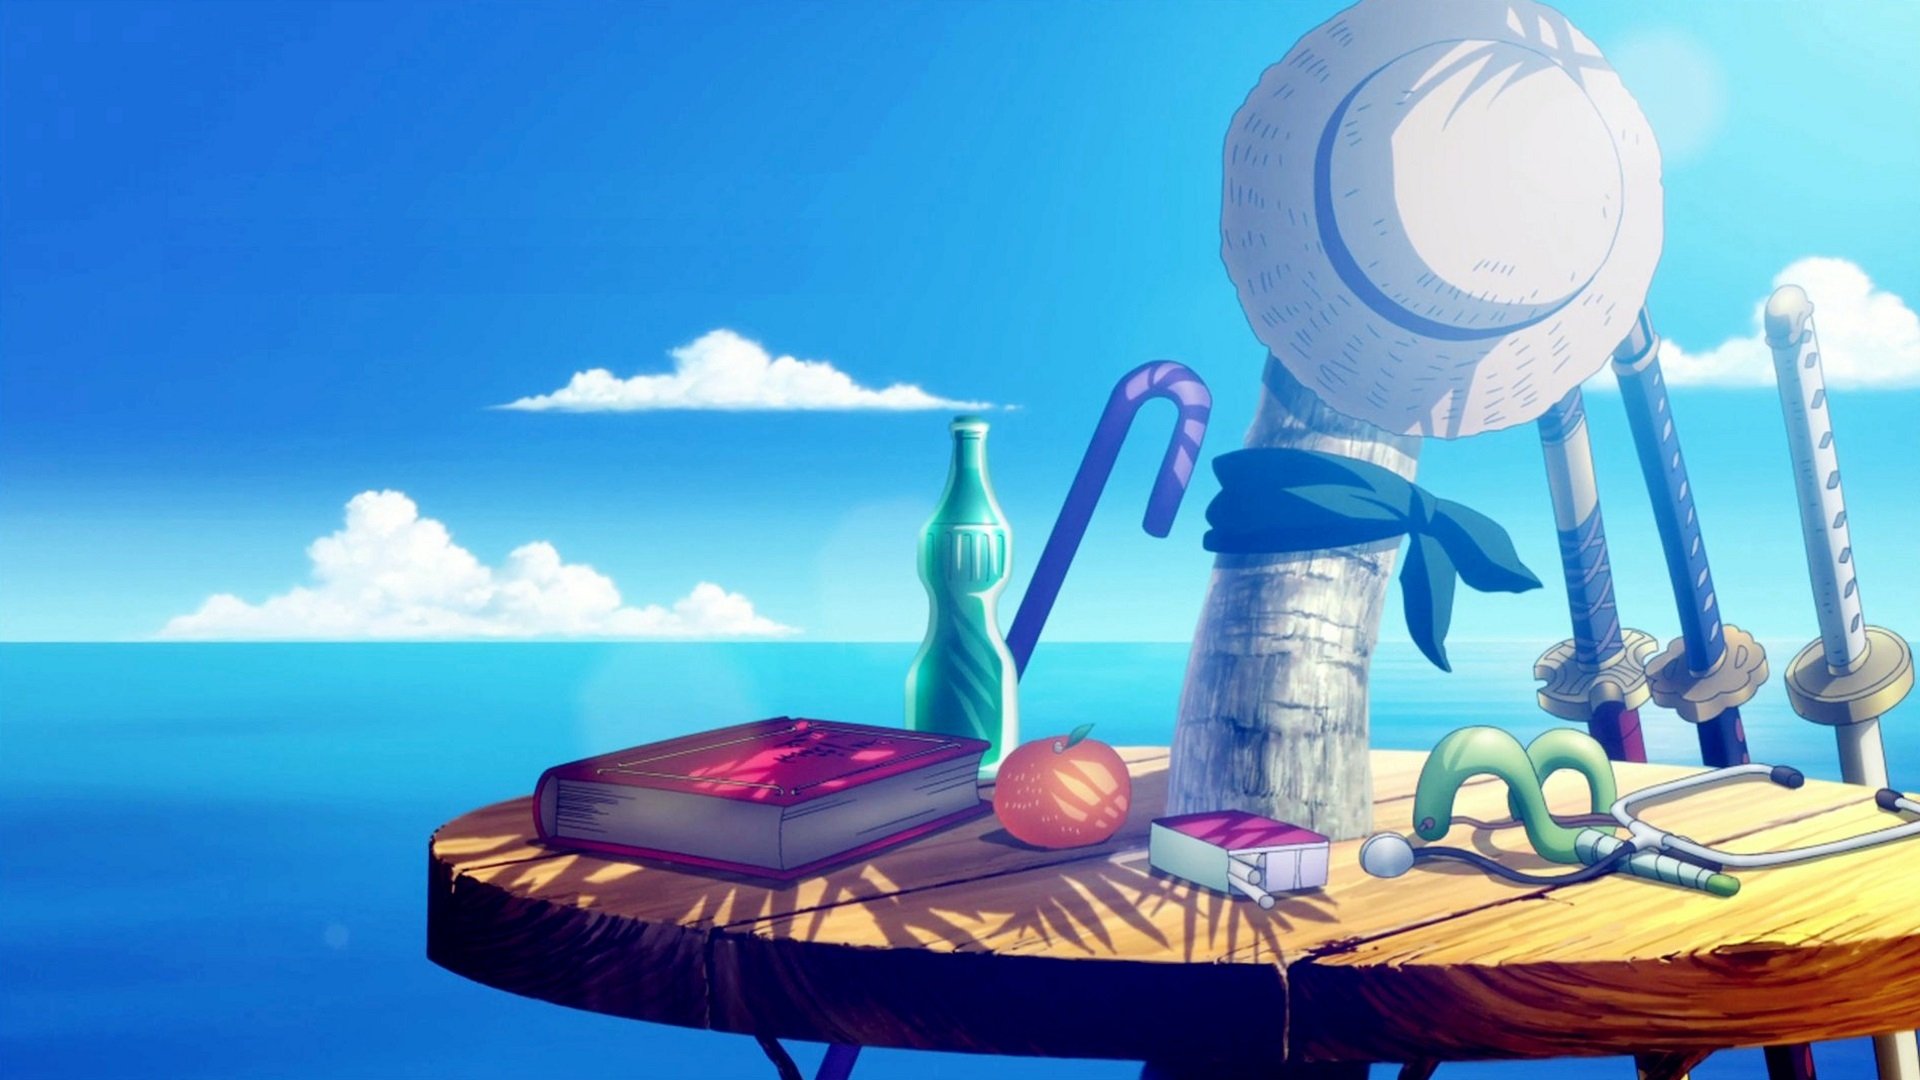 One Piece Full HD Wallpaper And Background Image 1920x1080 ID641999